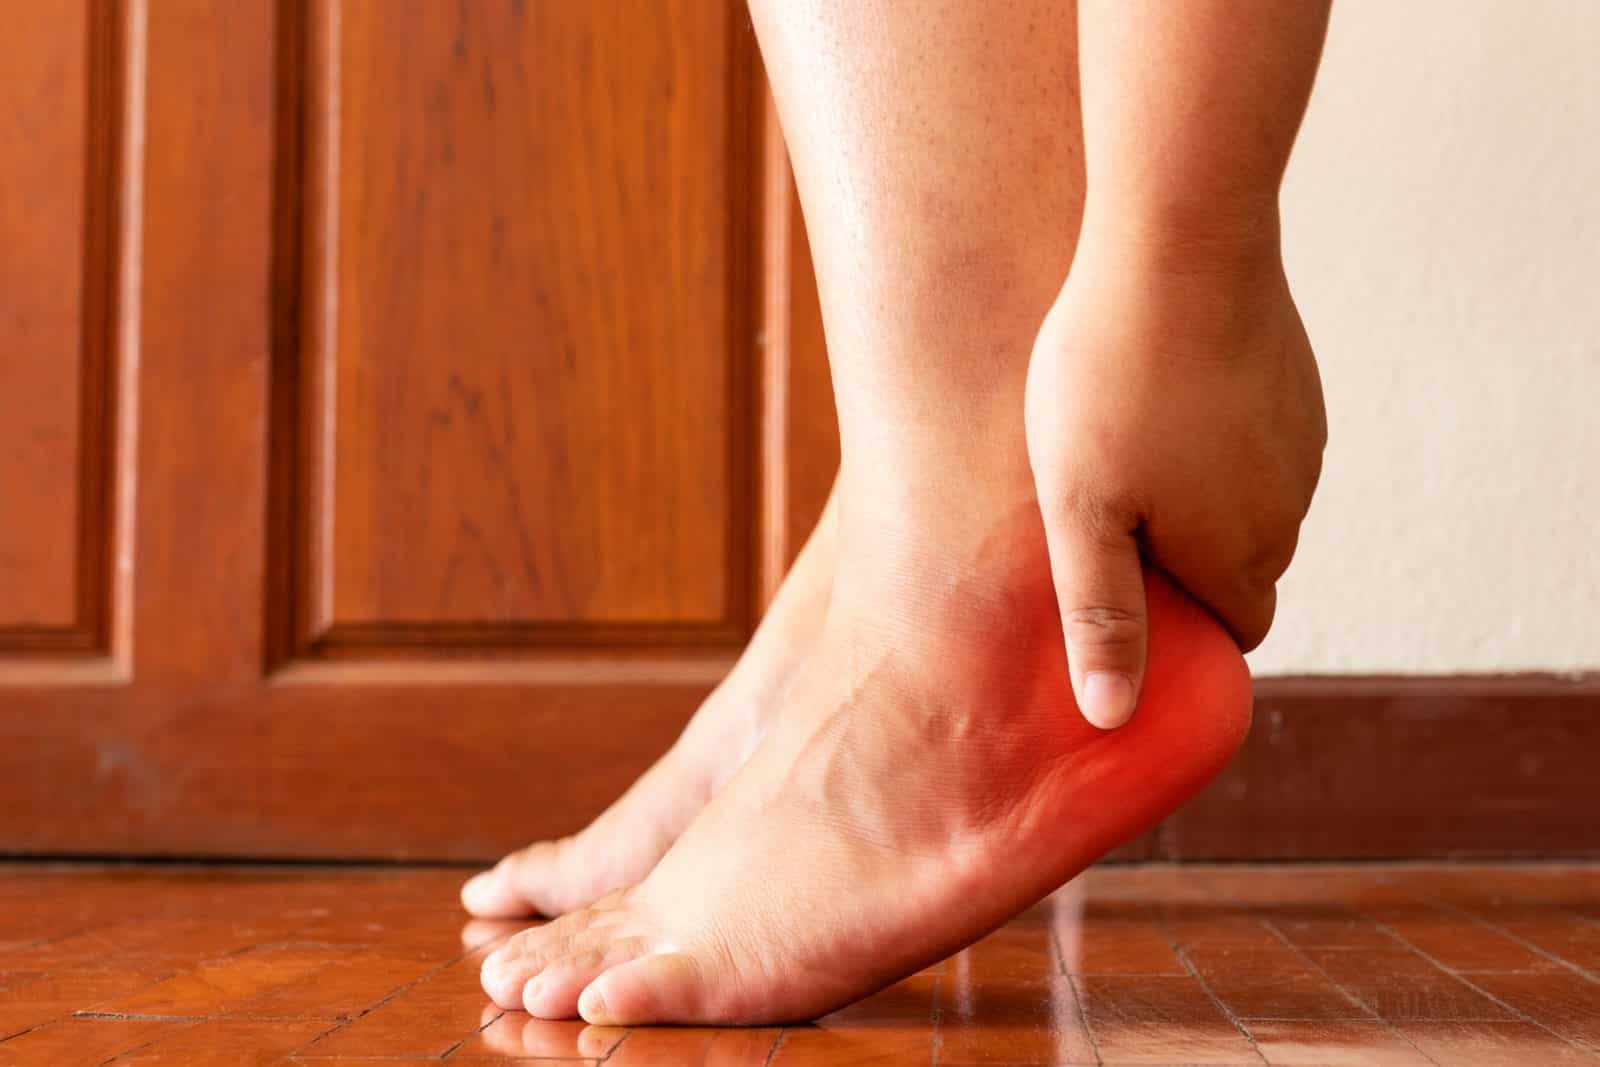 does medicare cover plantar fasciitis